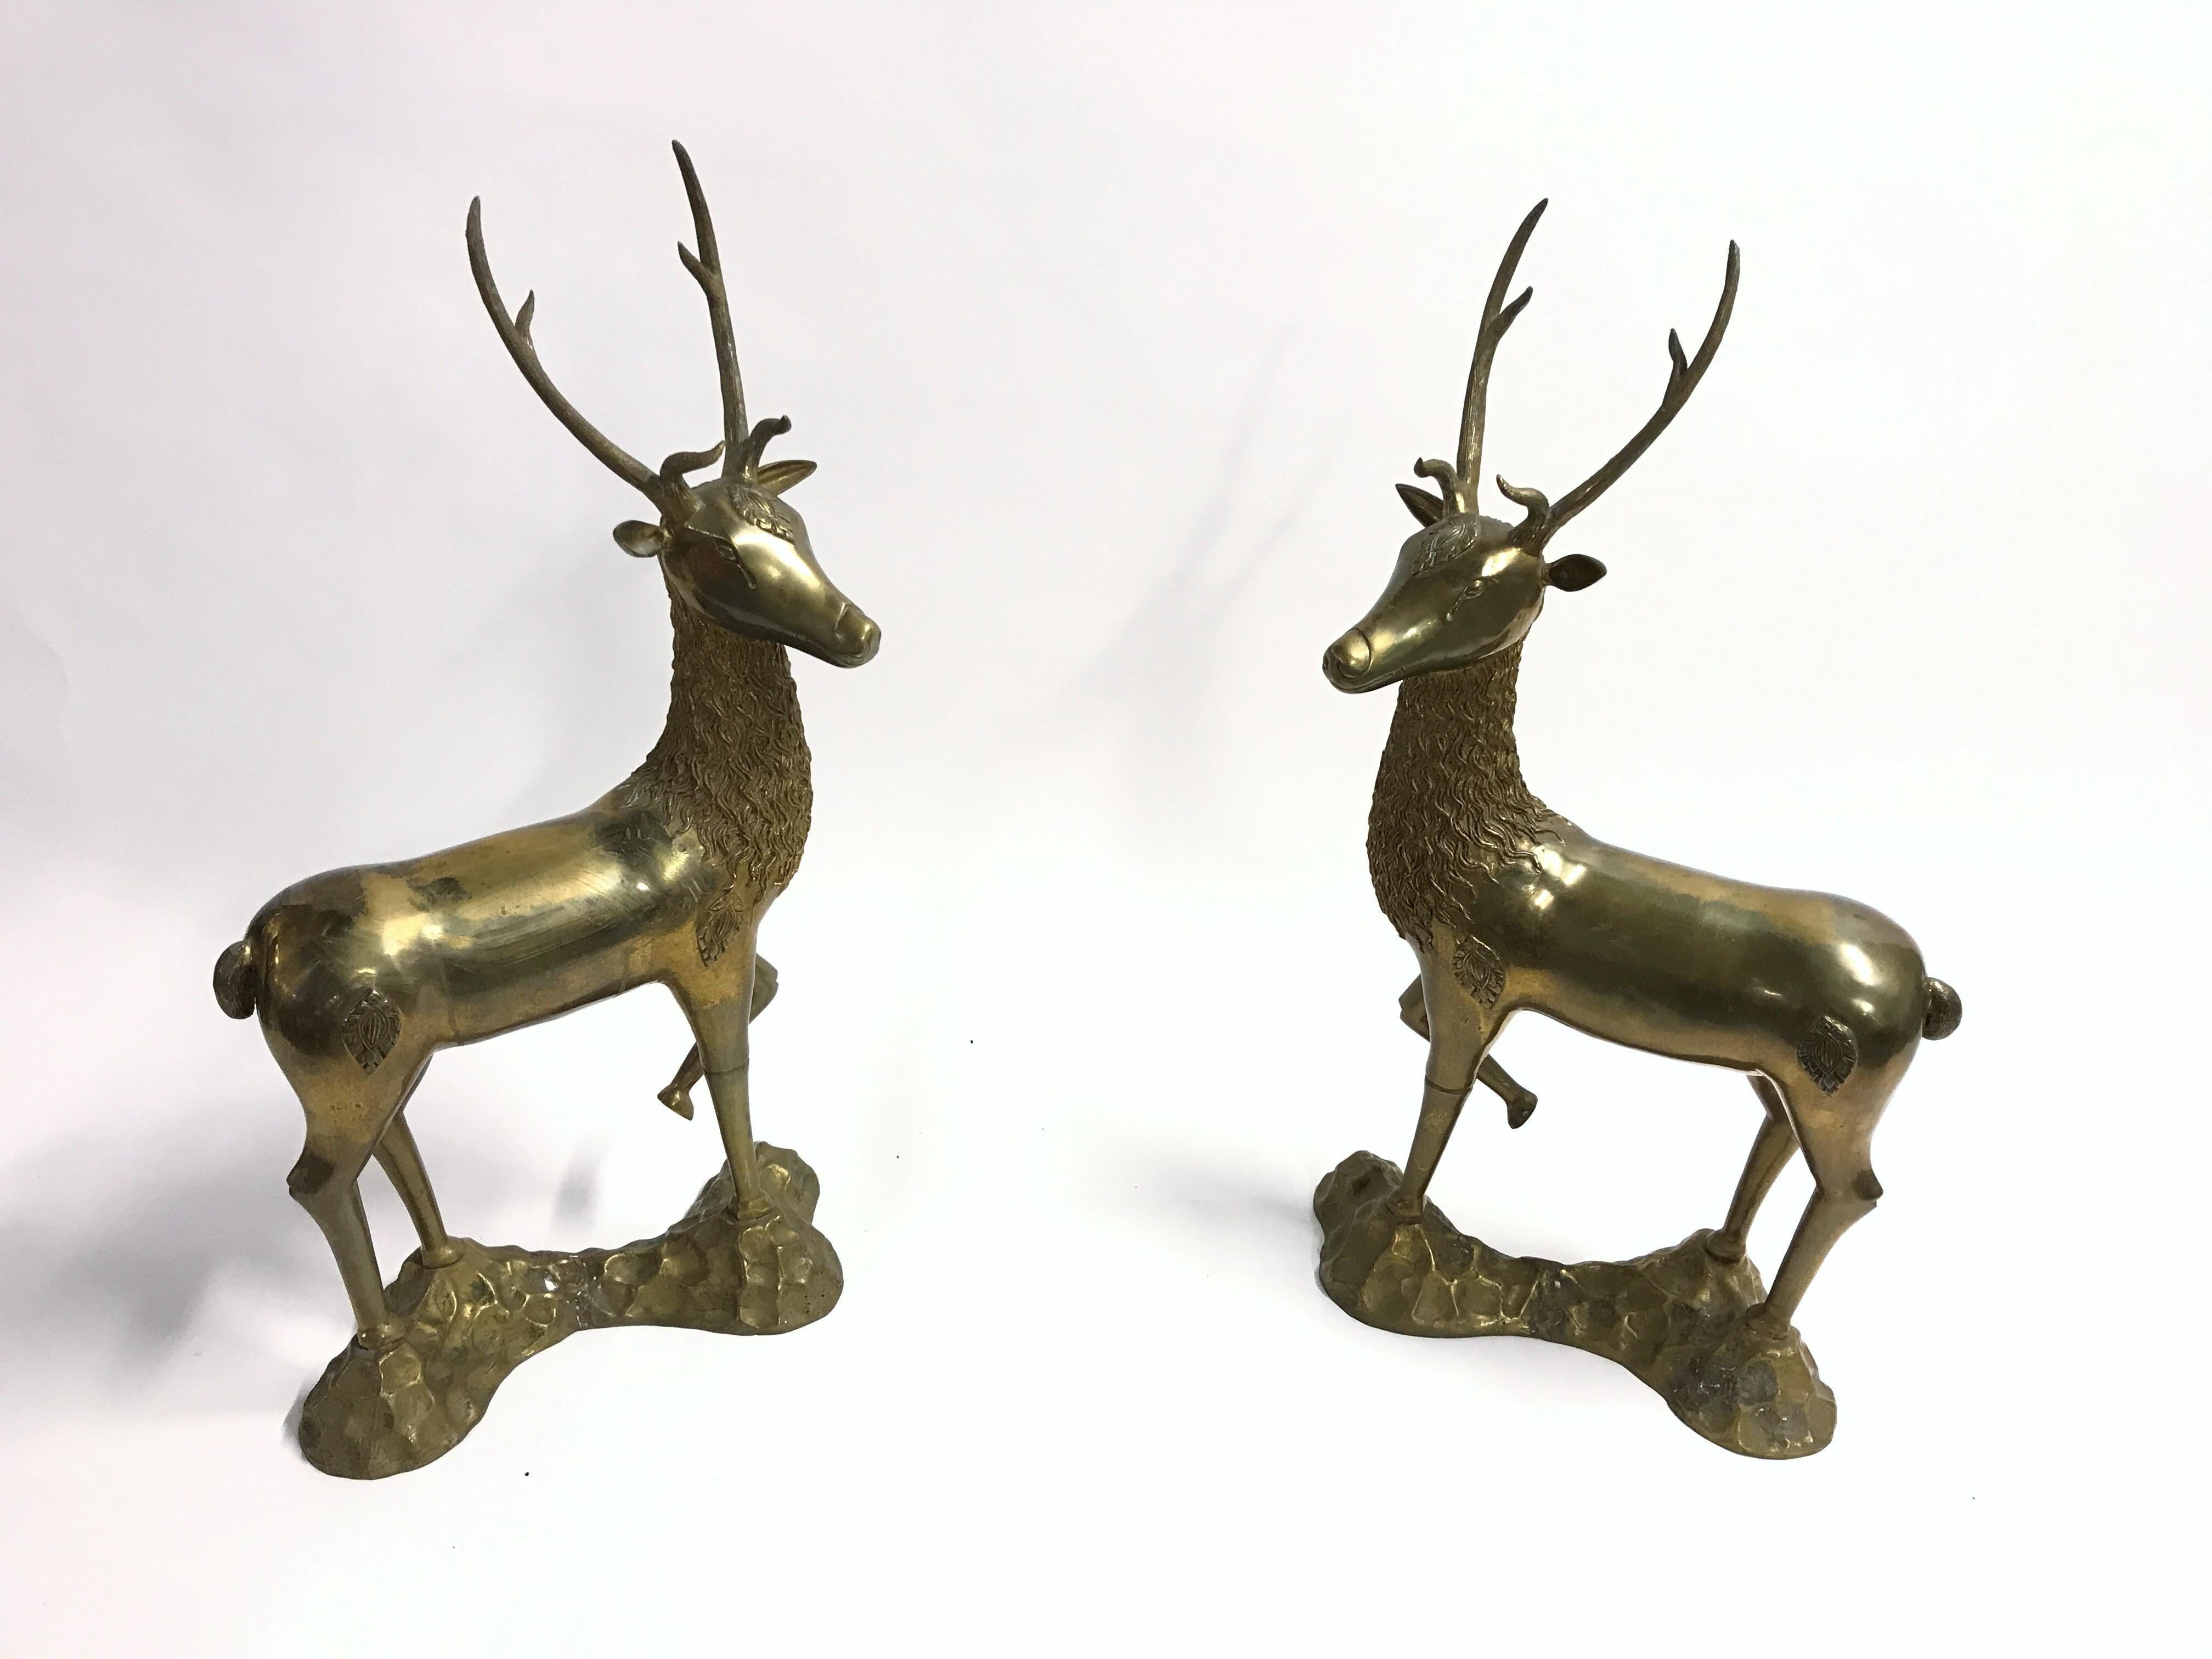 pair of large brass deer sculpture with antlers.

Beautiful original condition, light patina.

Beautiful elegant decorative sculpture.

1970s - France

Dimensions:
Height 82cm/32.28